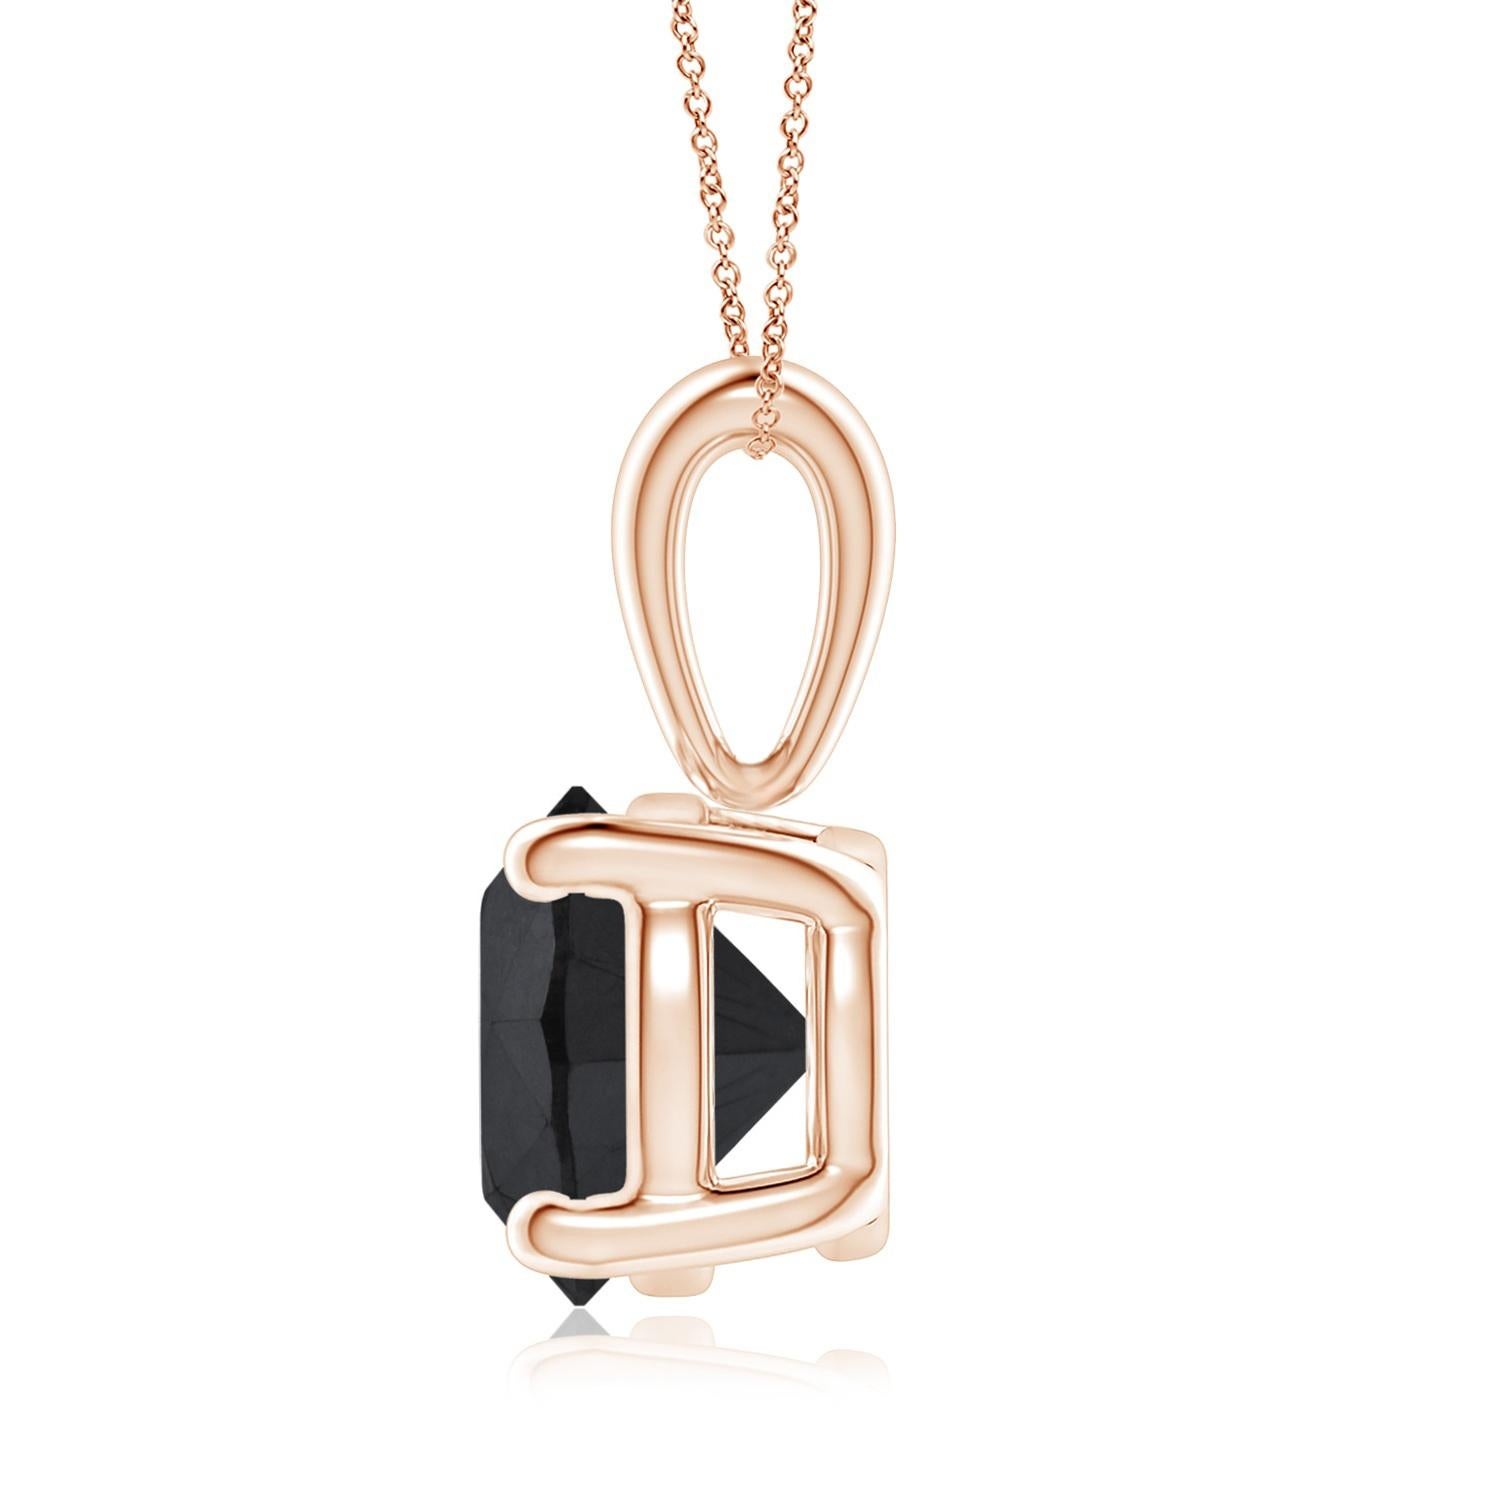 Surprise a special woman in your life with this breathtaking, statement hand crafted solitaire black diamond necklace. This eye-catching pendant necklace features a 1.64 carat round cut black diamond, measuring 6.60 x 6.58 x 5.38 mm set in 14k rose